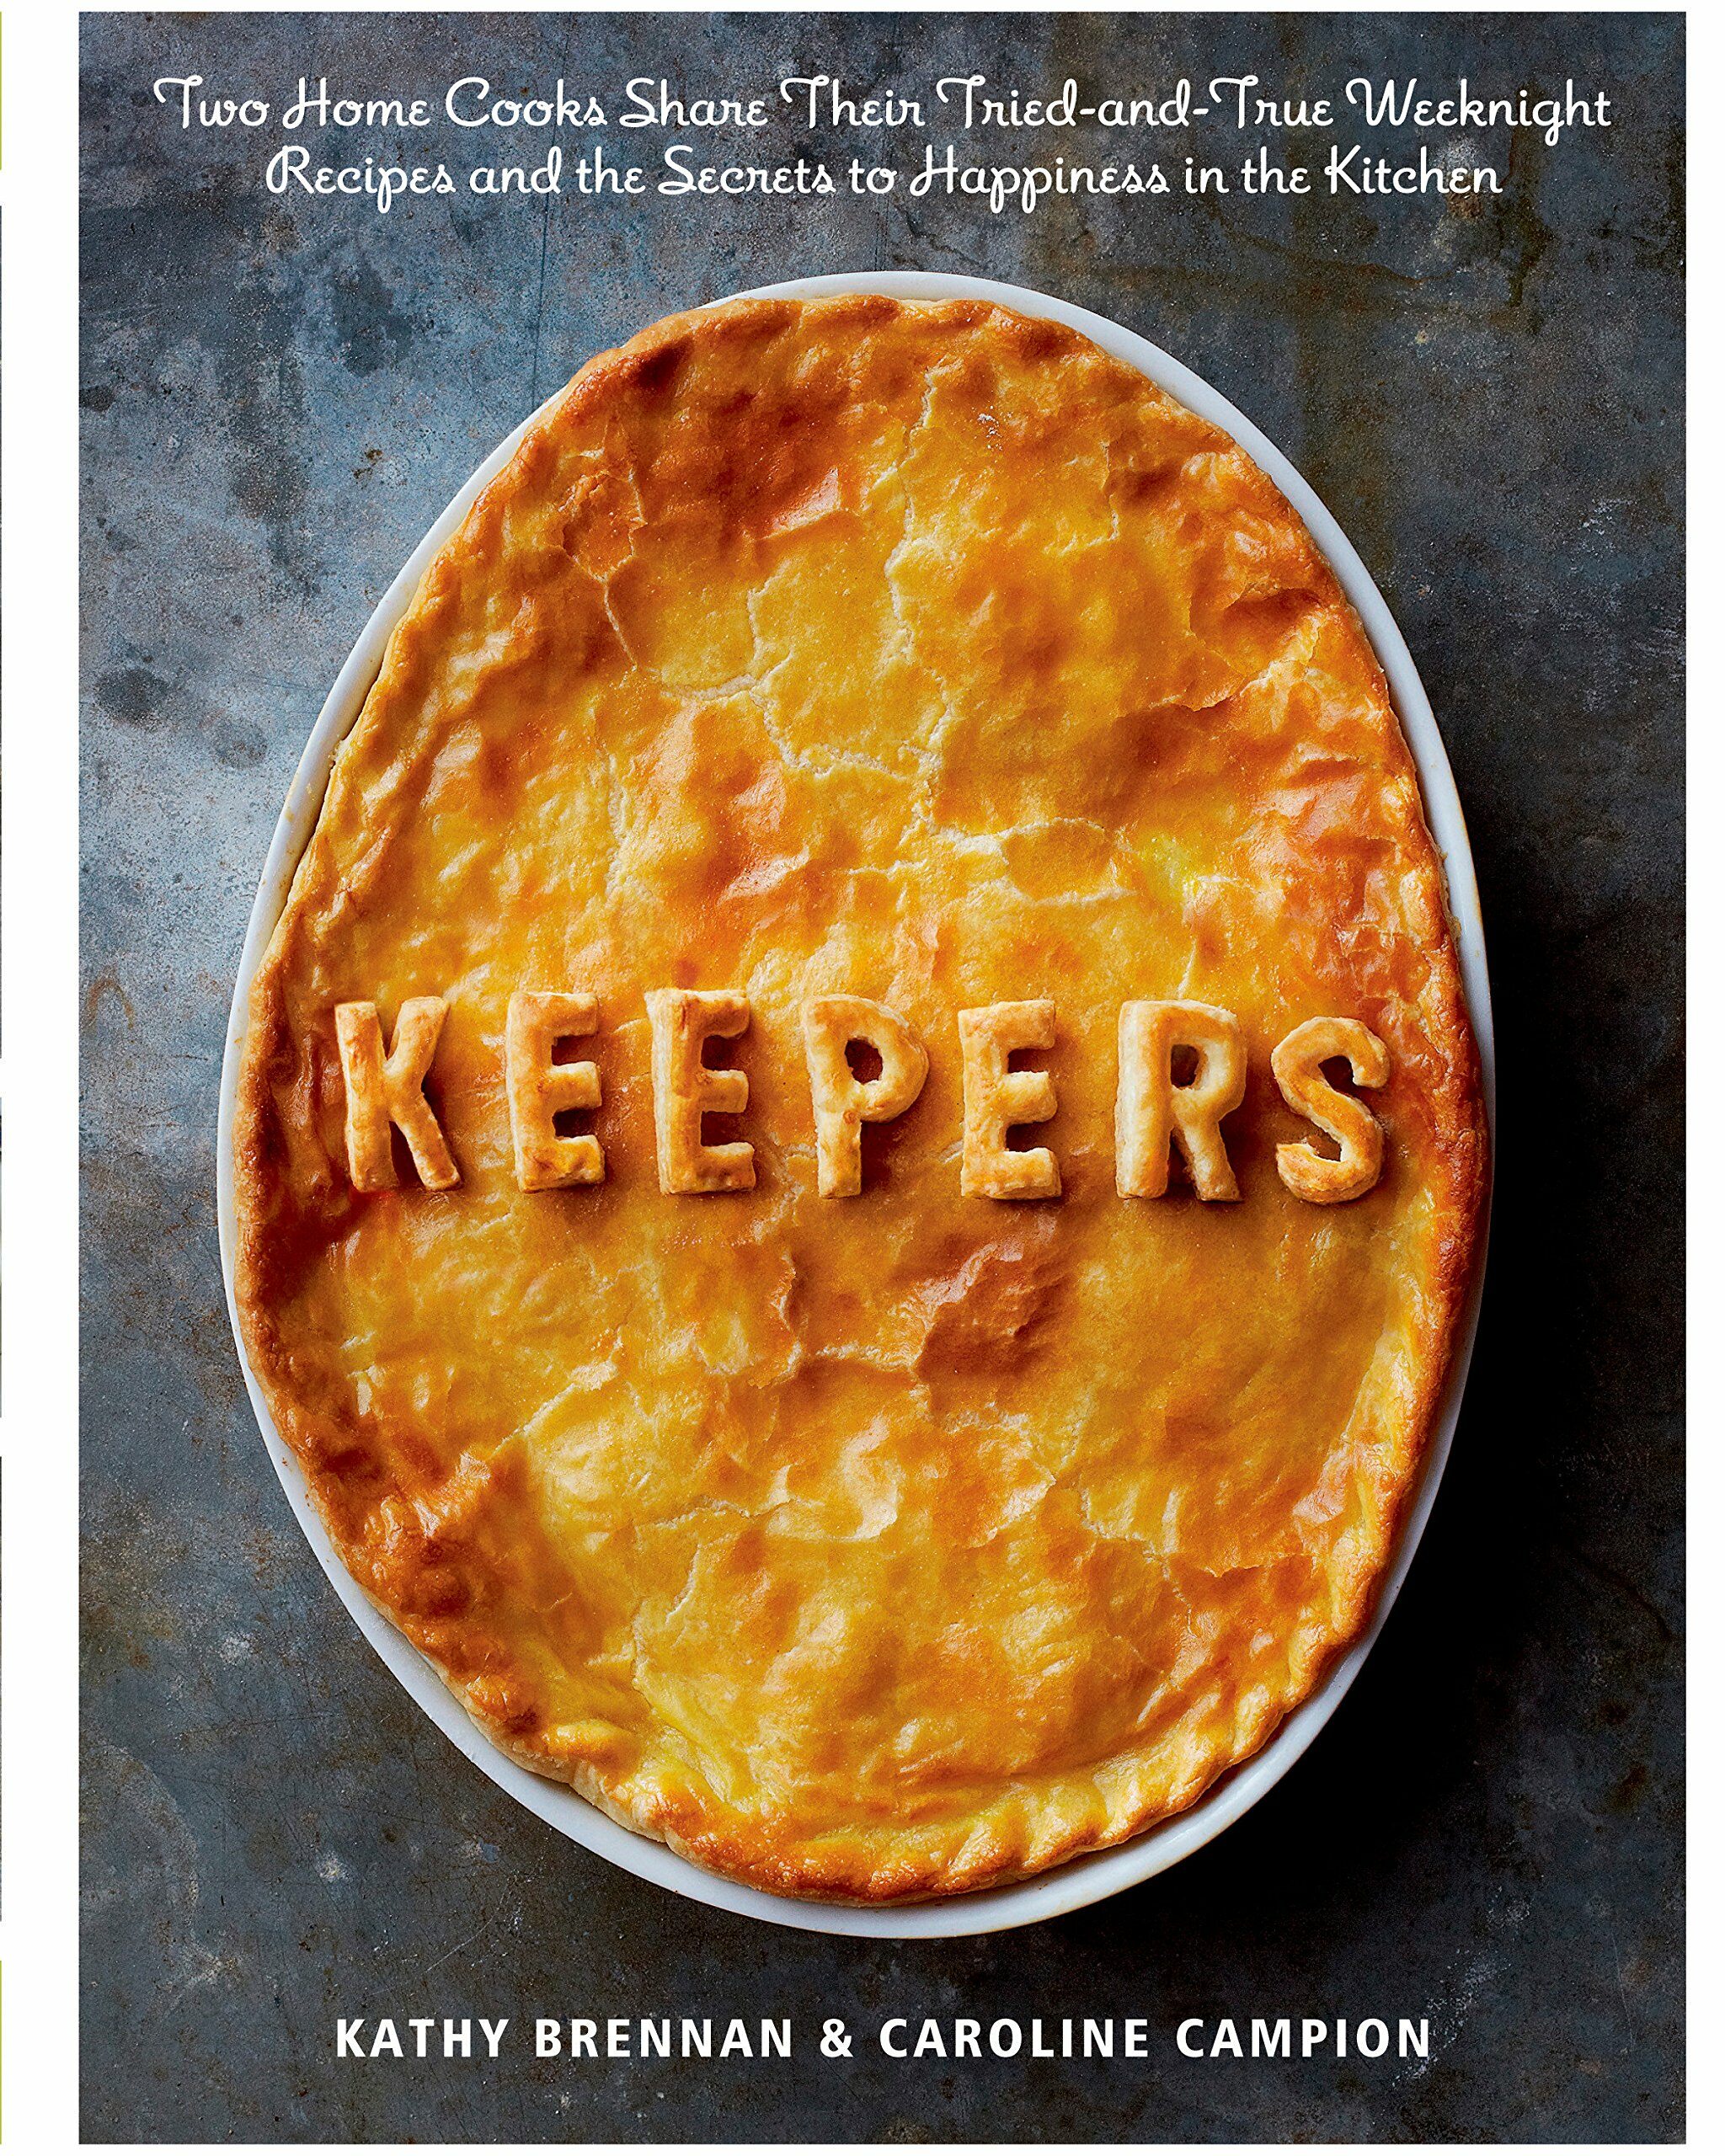 Keepers: Two Home Cooks Share Their Tried-And-True Weeknight Recipes and the Secrets to Happiness in the Kitchen: A Cookbook (Hardcover)